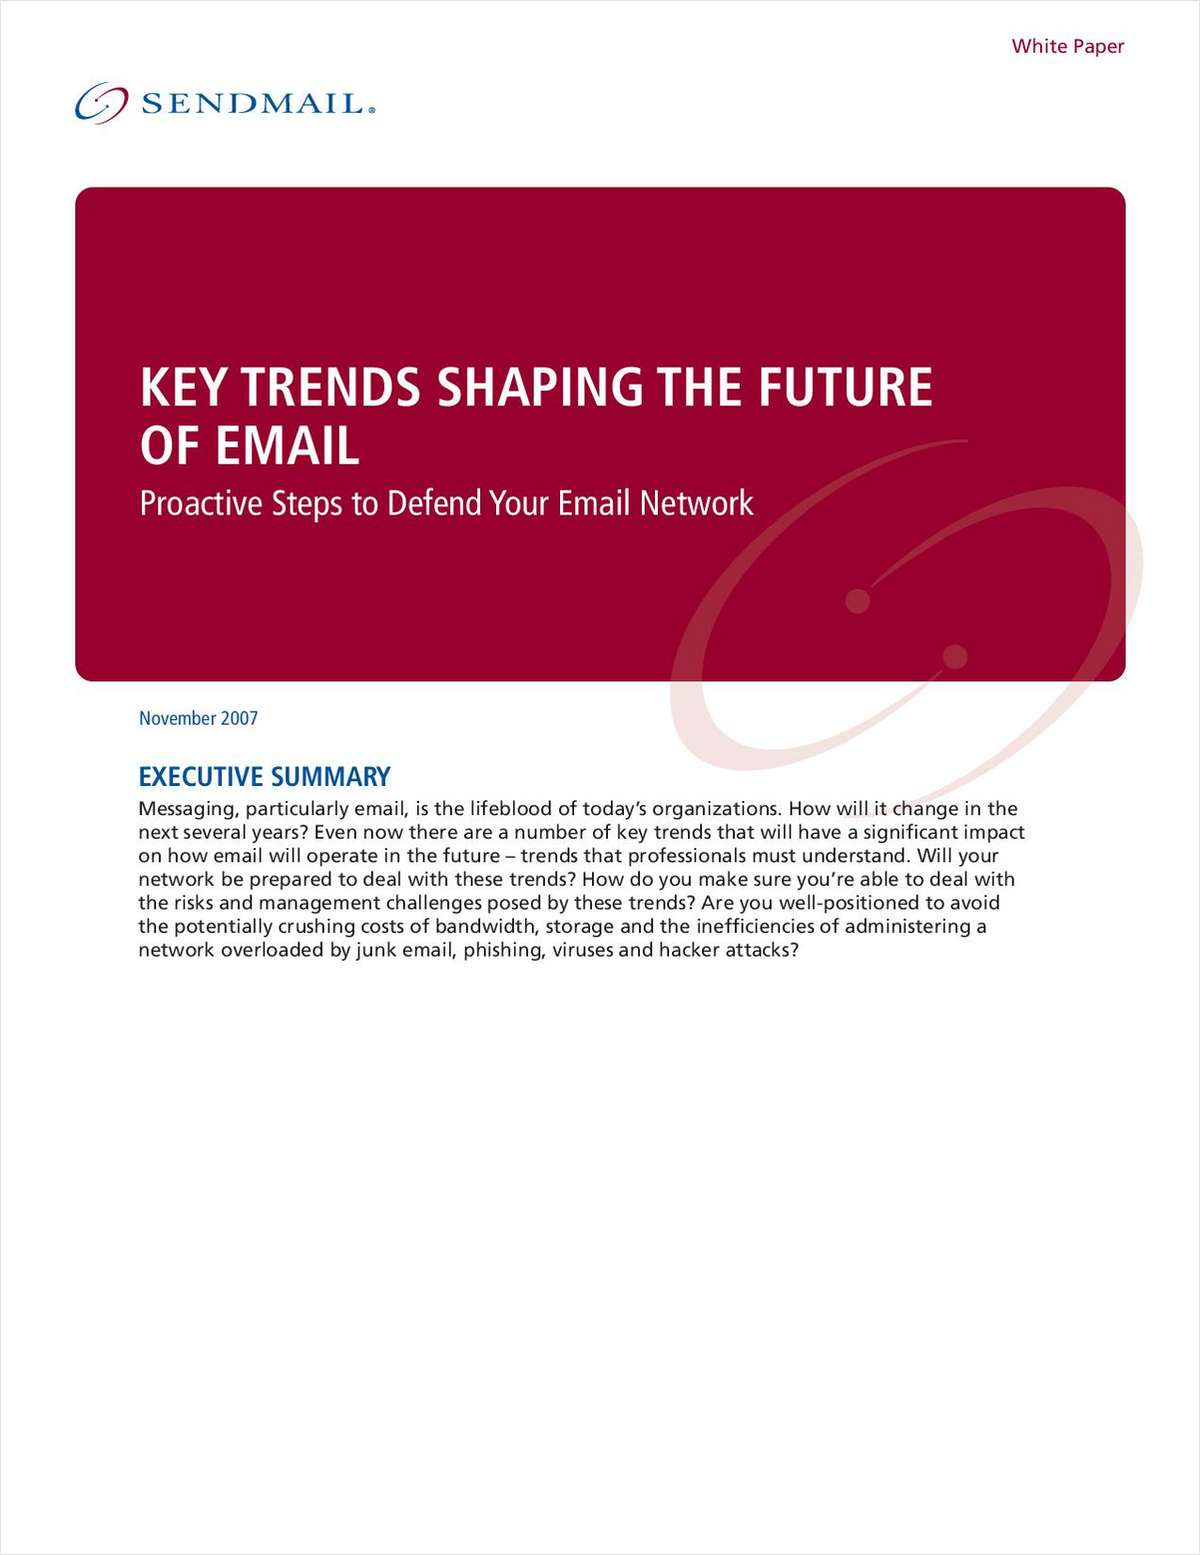 Key Trends Shaping the Future of Email